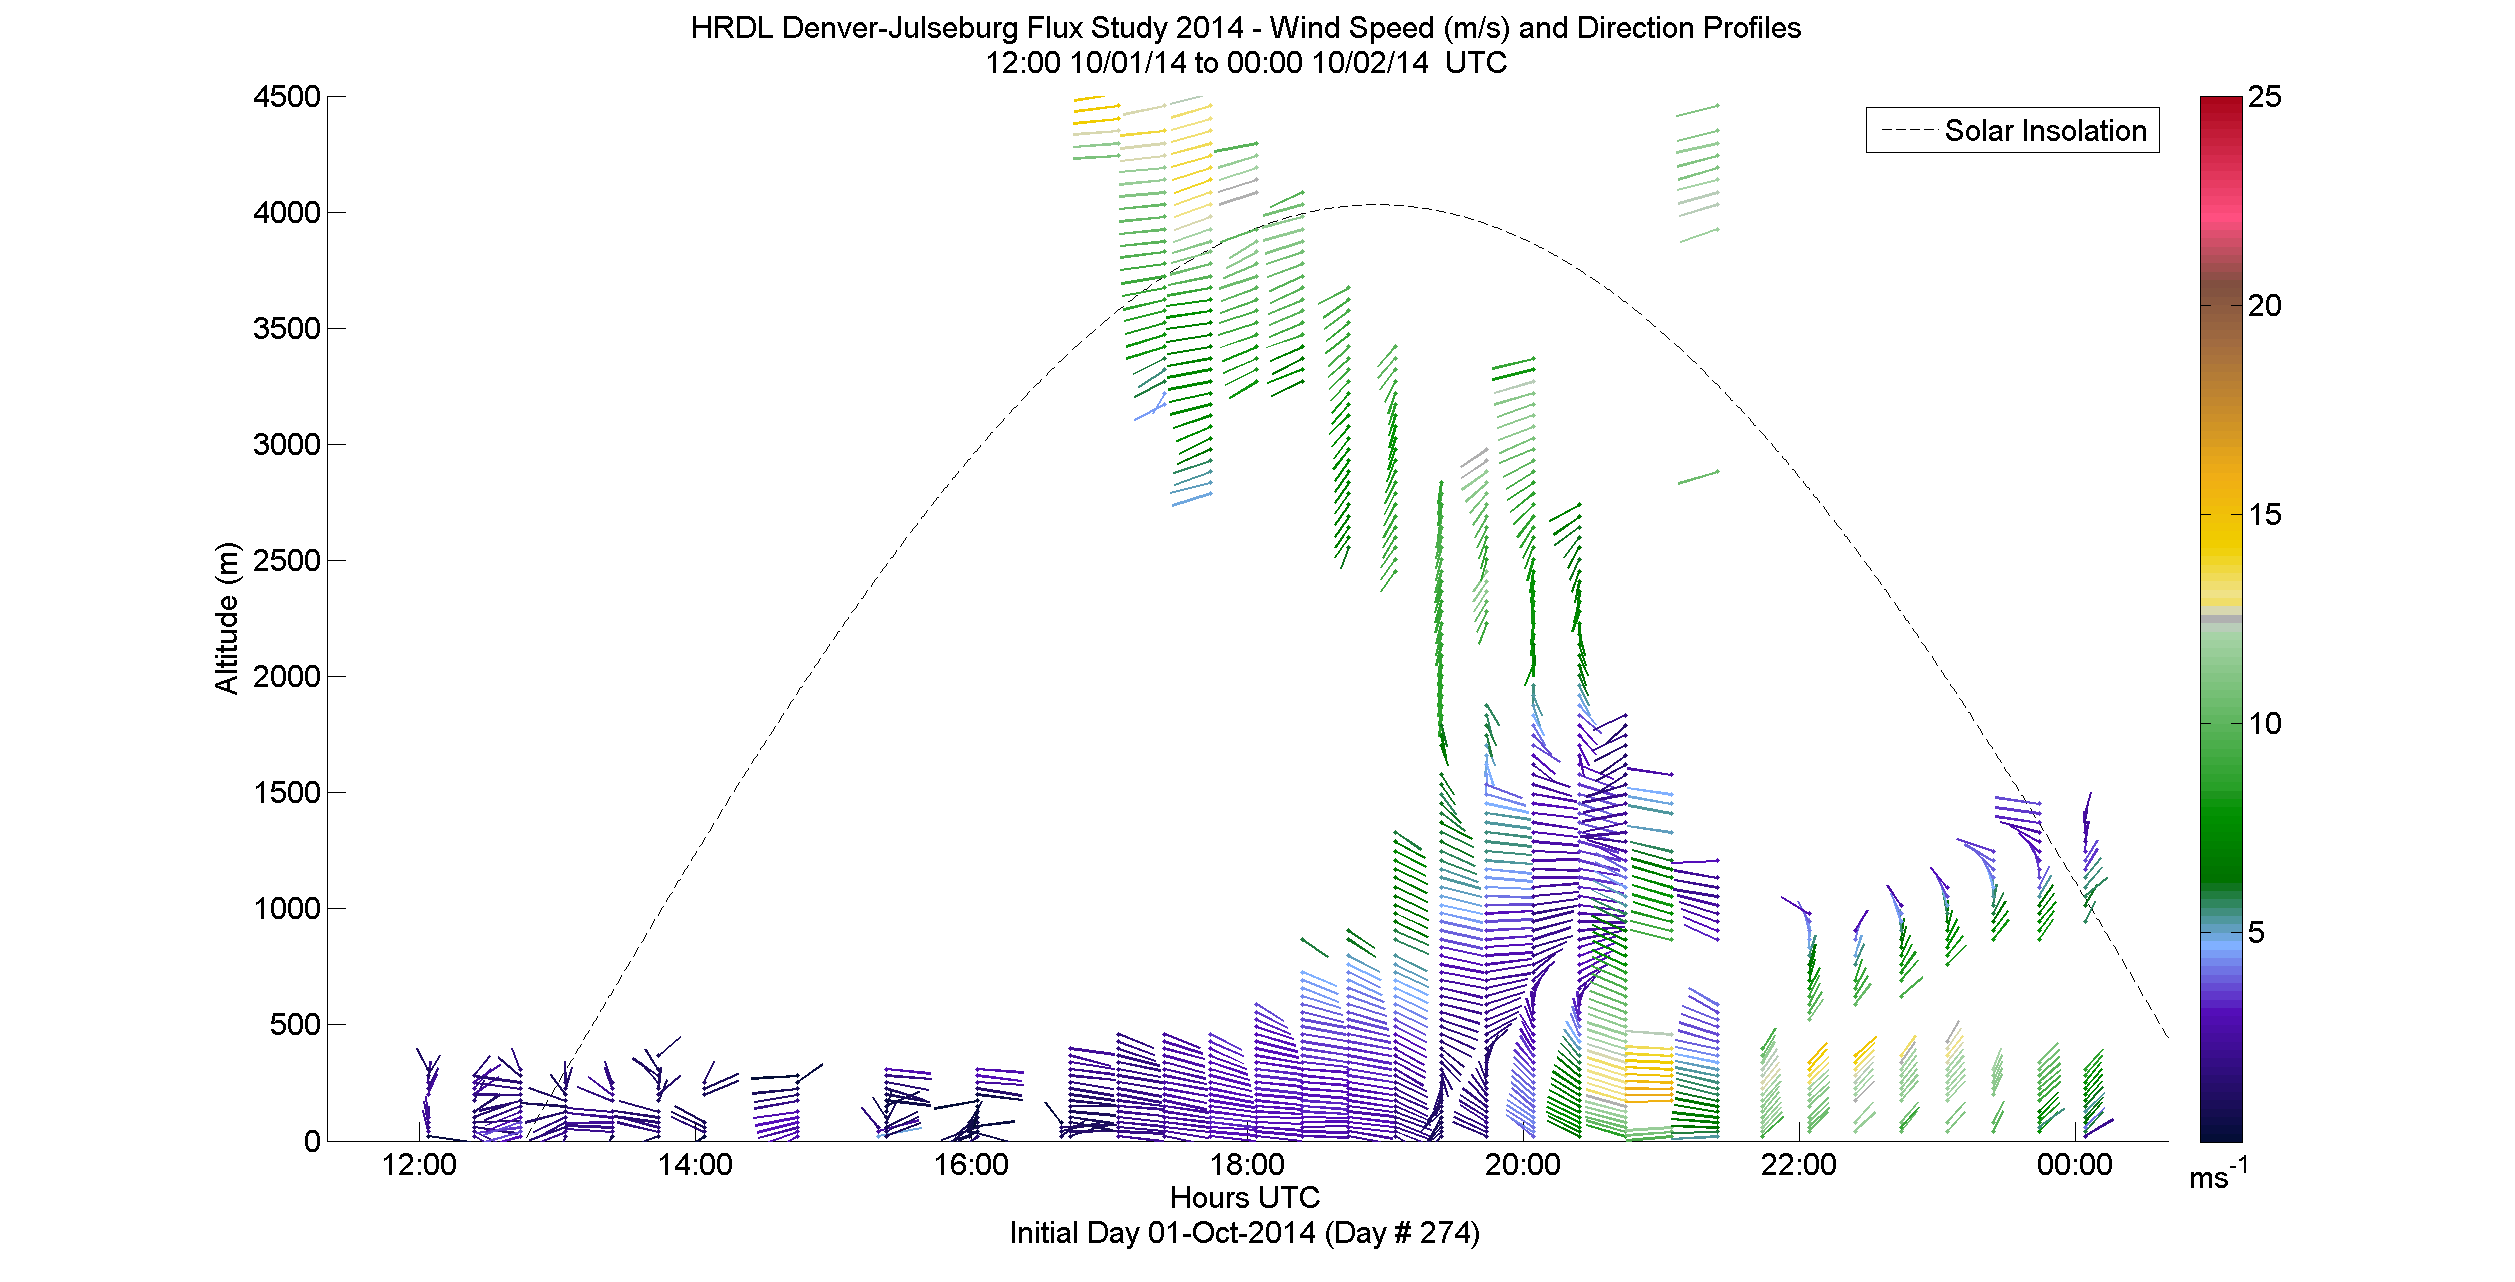 HRDL speed and direction profile - October 1 pm